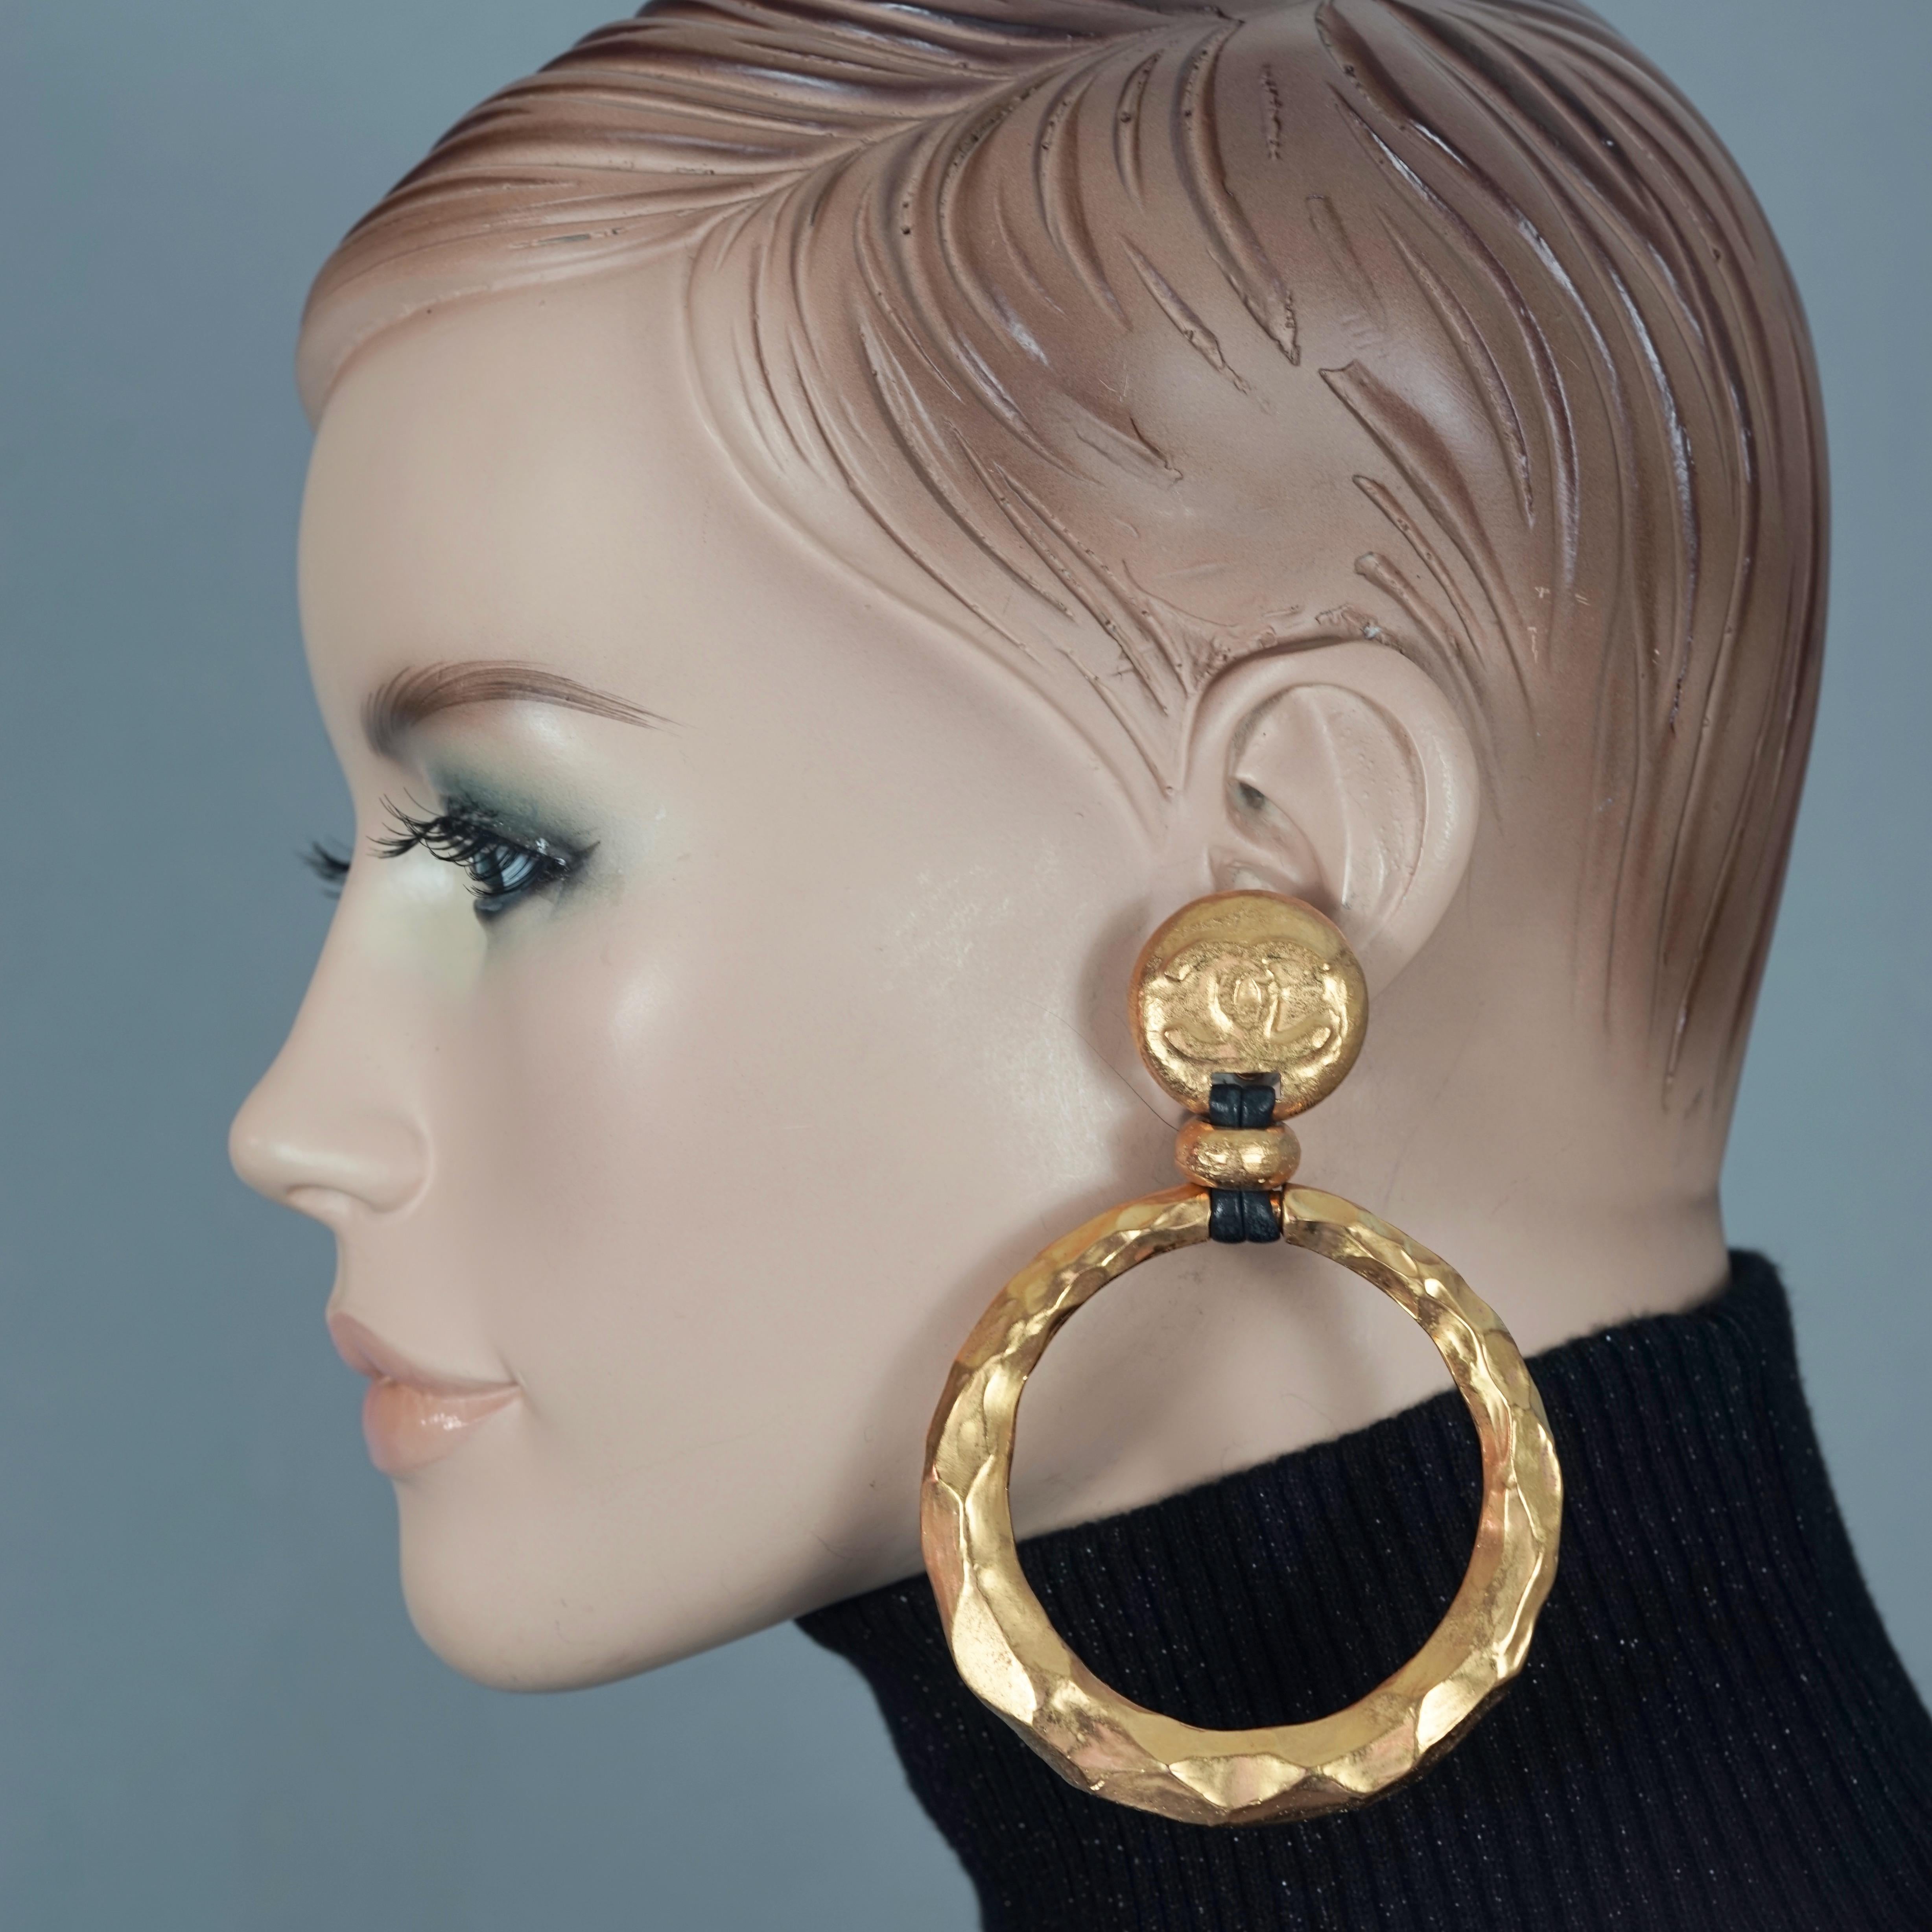 Vintage Jumbo CHANEL Logo Hammered Hoop Dangle Earrings As Seen on Beyonce

Measurements:
Height: 3.93 inches (10 cm)
Diameter: 2.75 inches (7 cm)
Weight per Earrings: 17 gram

Features:
- 100% Authentic CHANEL.
- Jumbo CC logo hoop earrings with